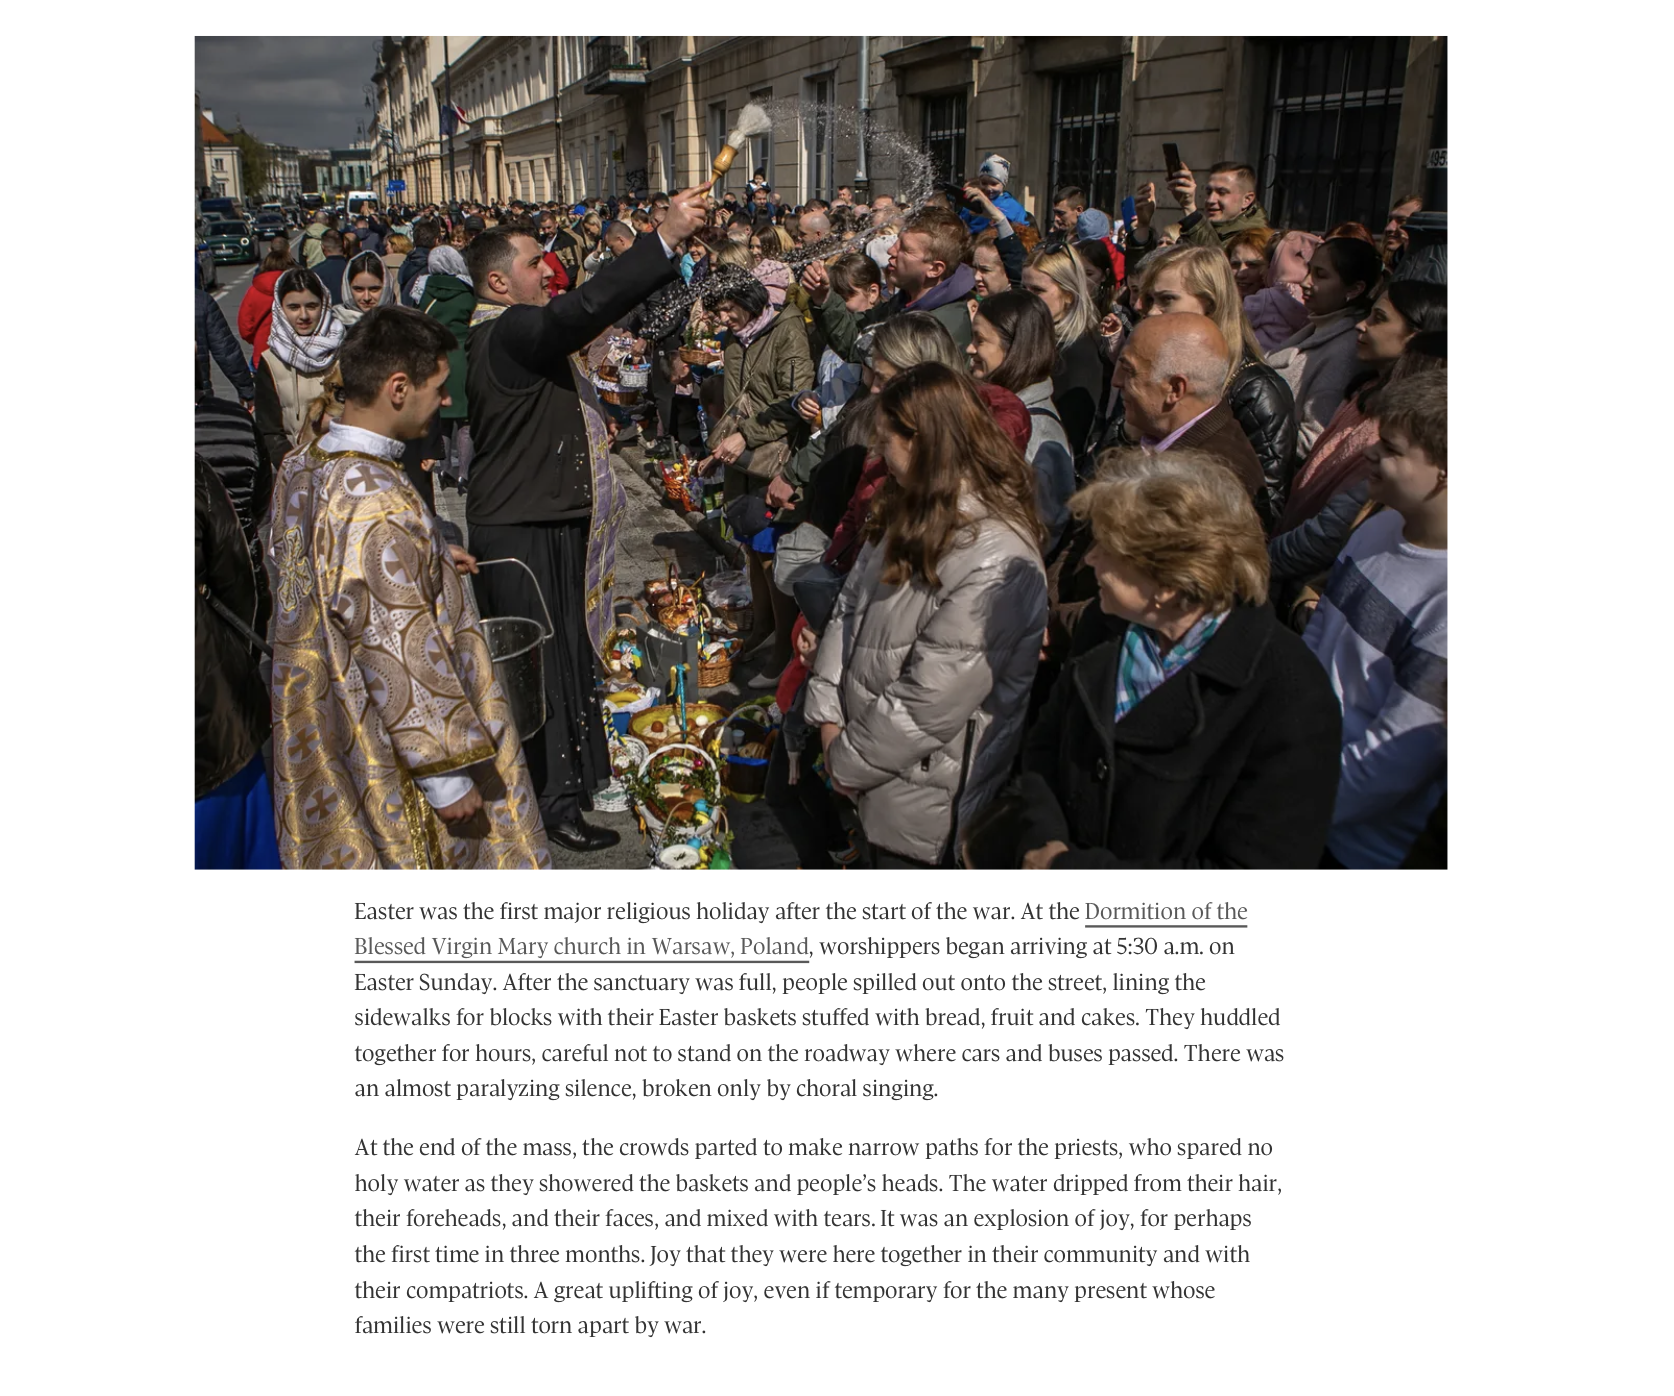 Art and Documentary Photography - Loading The_Globe___s_eyes_in_Ukraine_anna_liminowicz_6.png